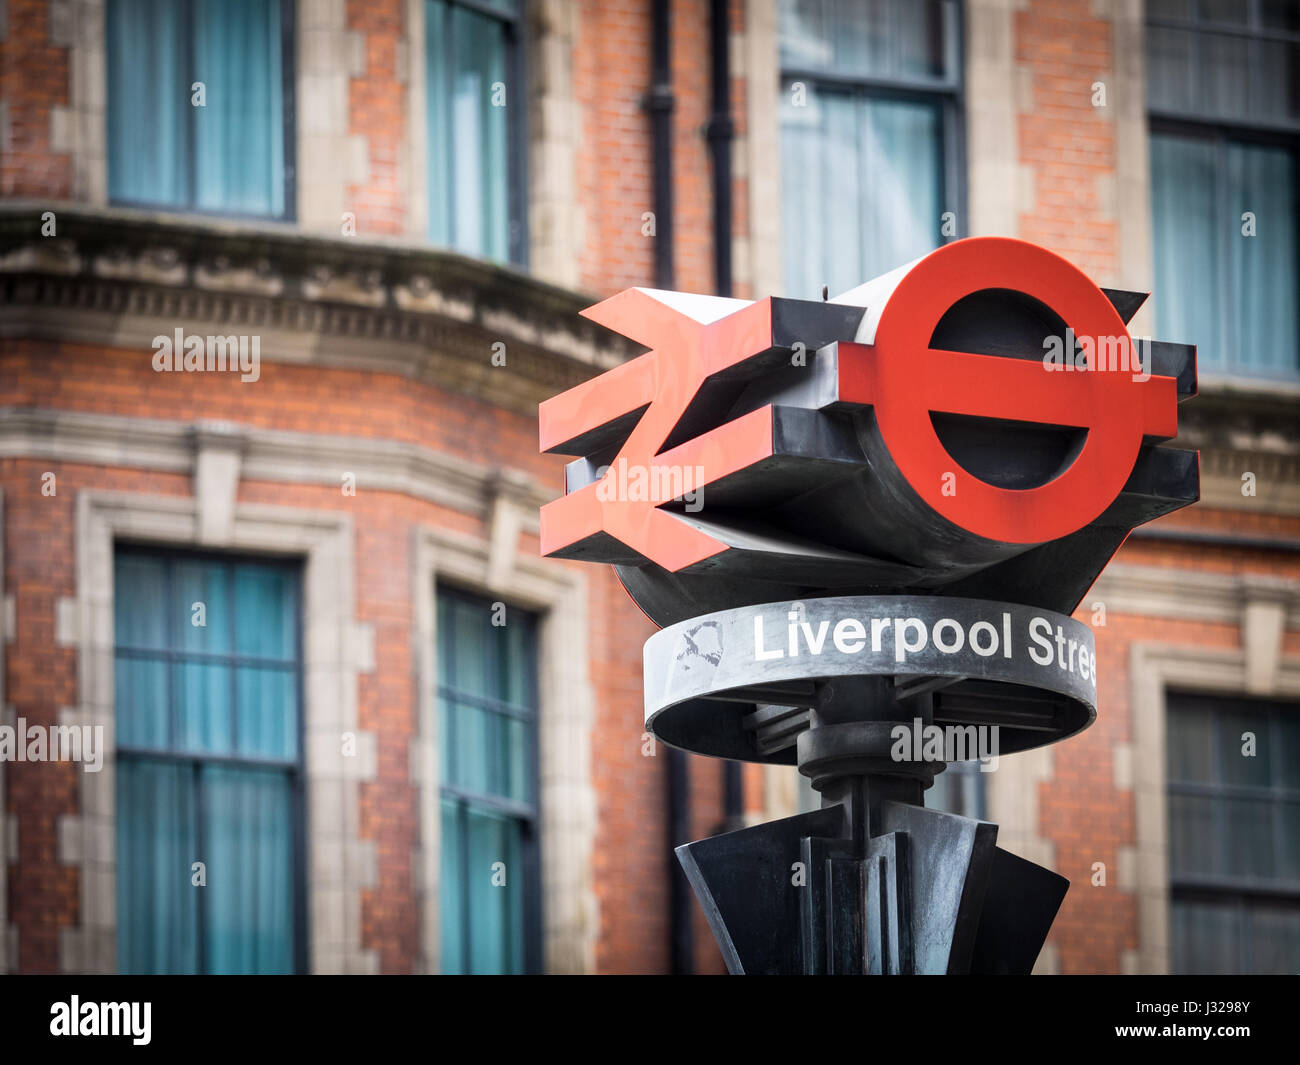 London Liverpool Street Station - A sign outside the combined Mainline Railway and London Underground Liverpool Street station in central London UK Stock Photo